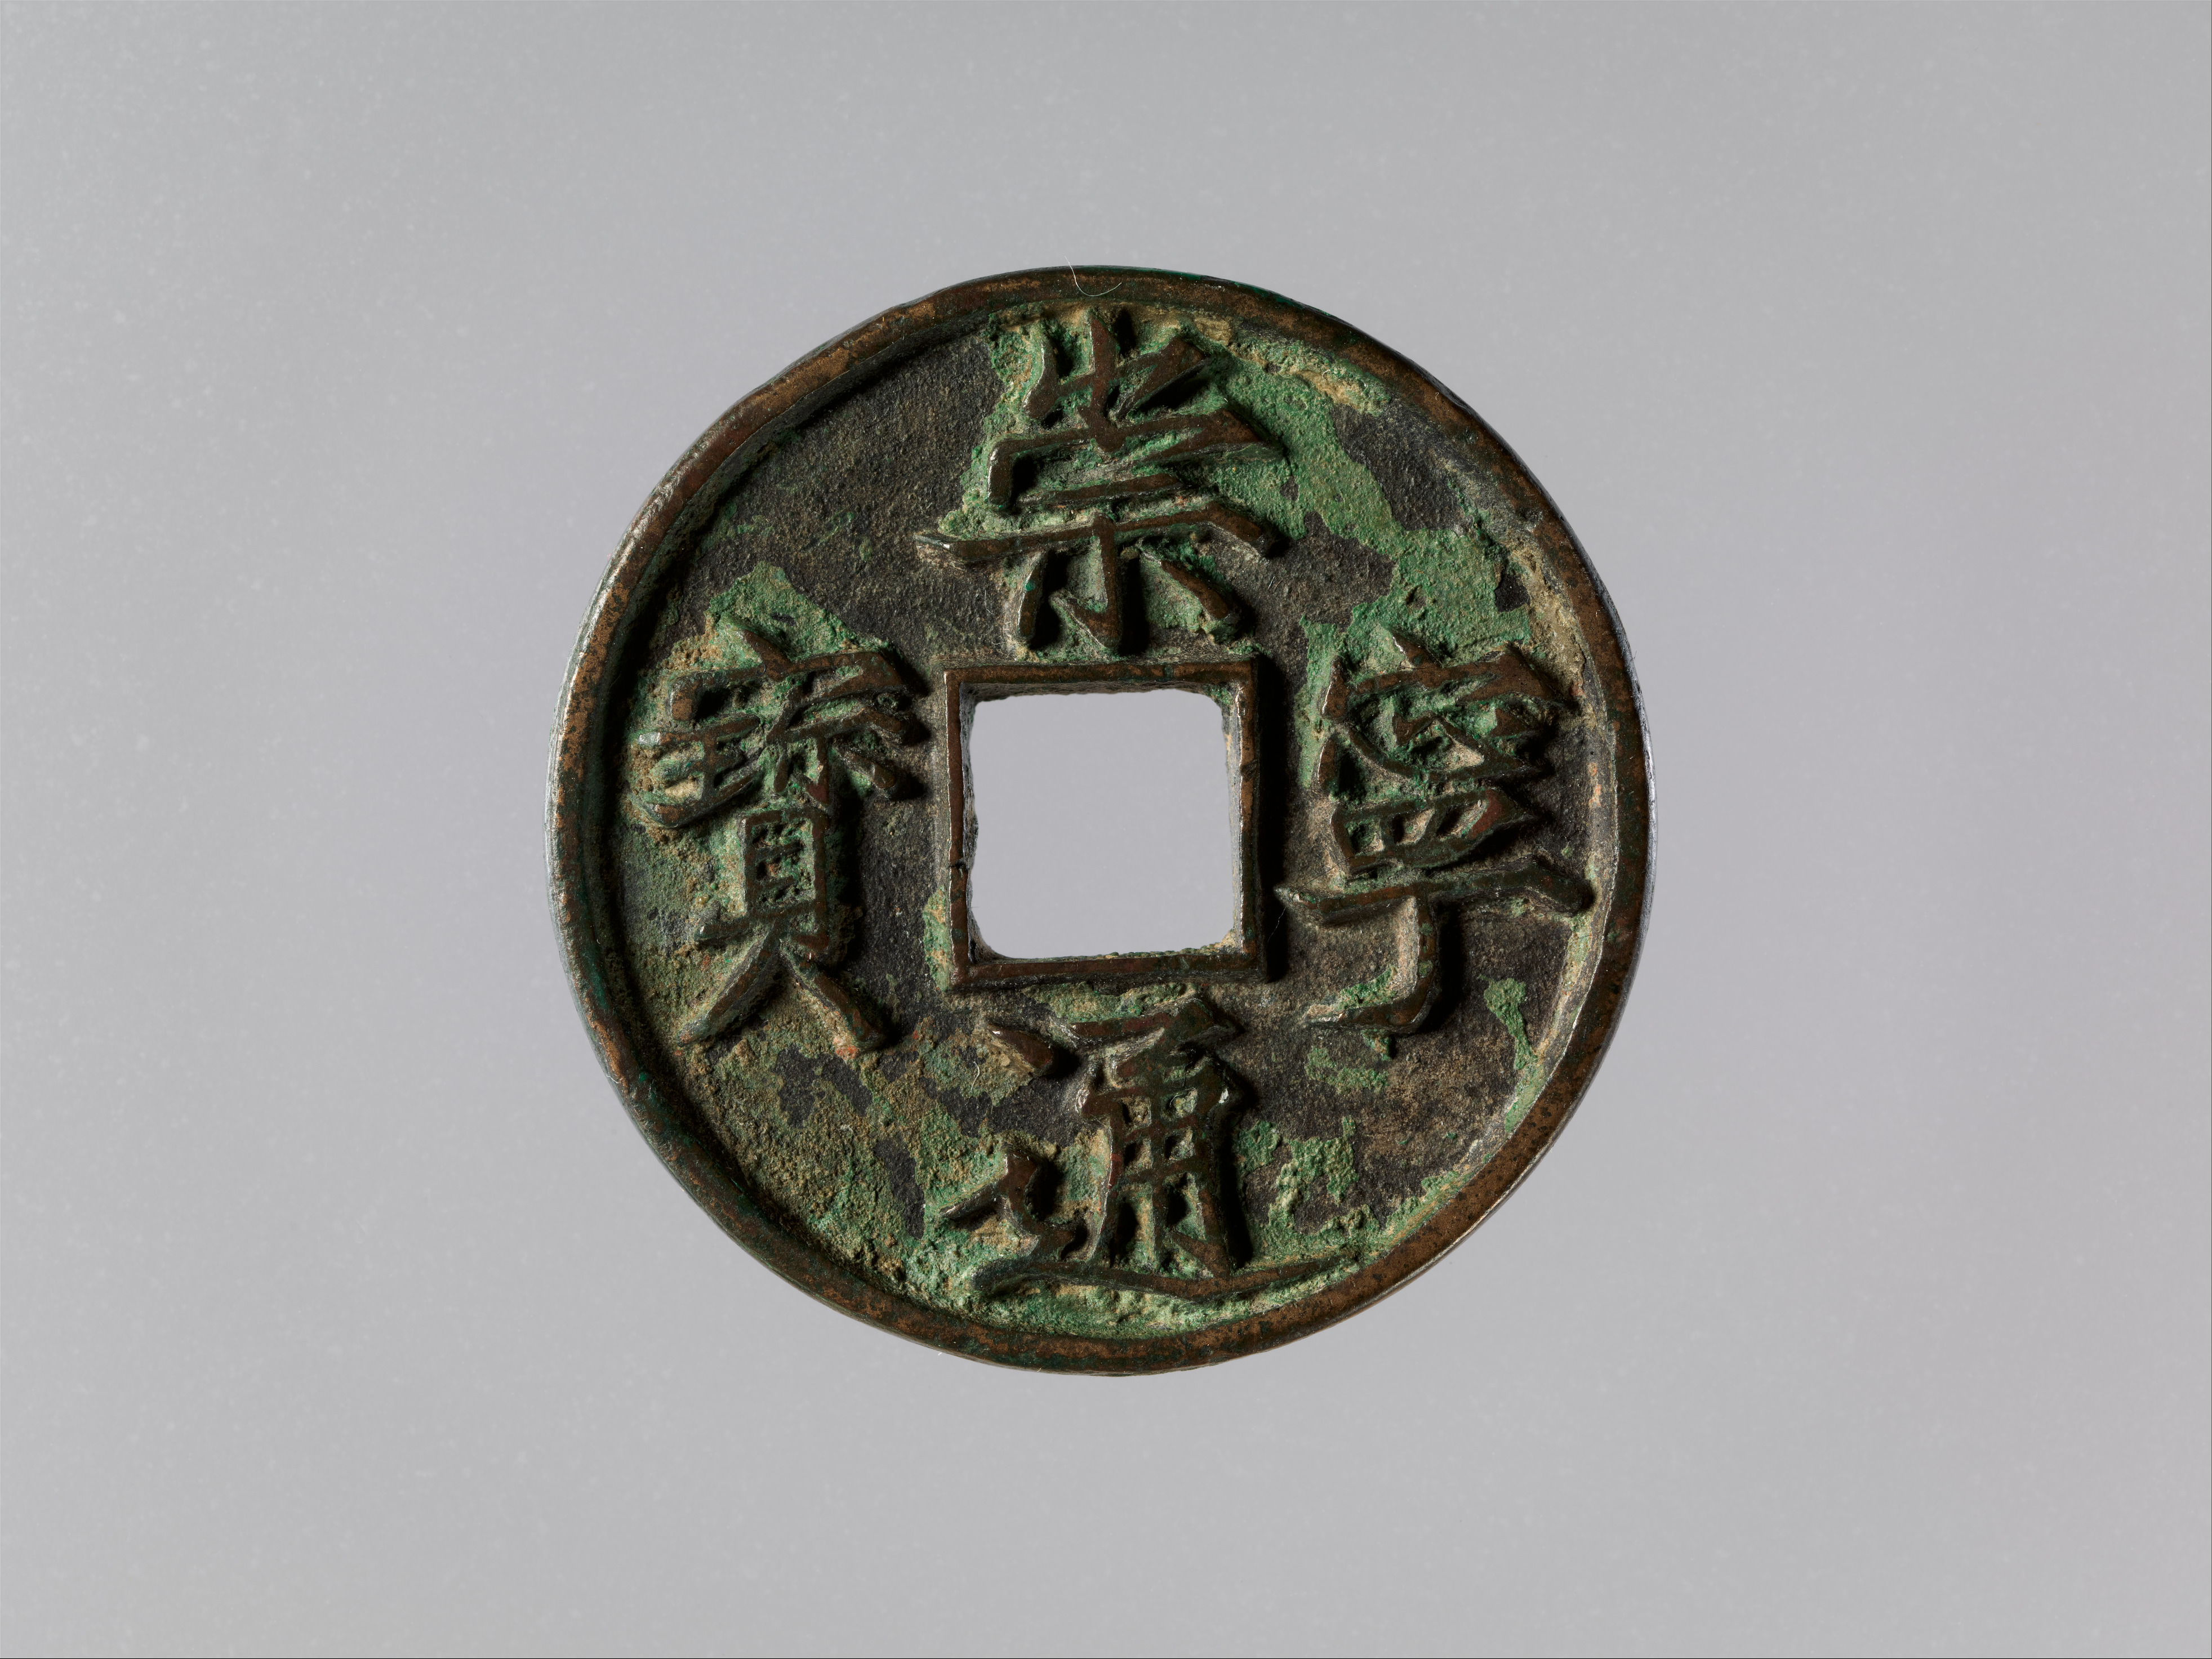 Southern Song dynasty coinage - Wikipedia